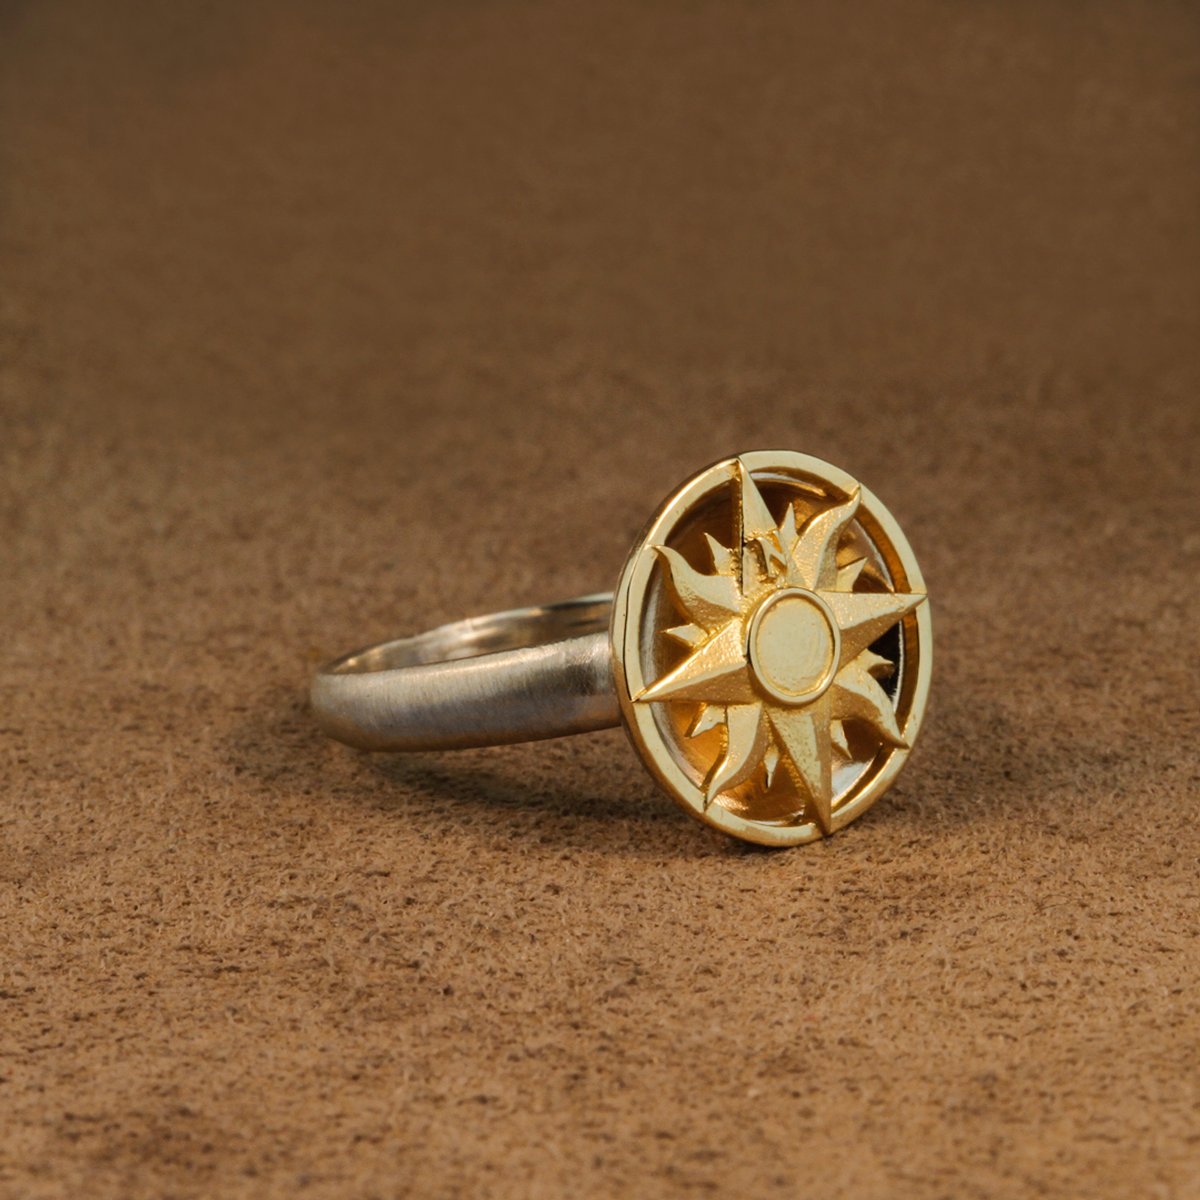 Compass Rose Ring, 14k Gold and Sterling Silver